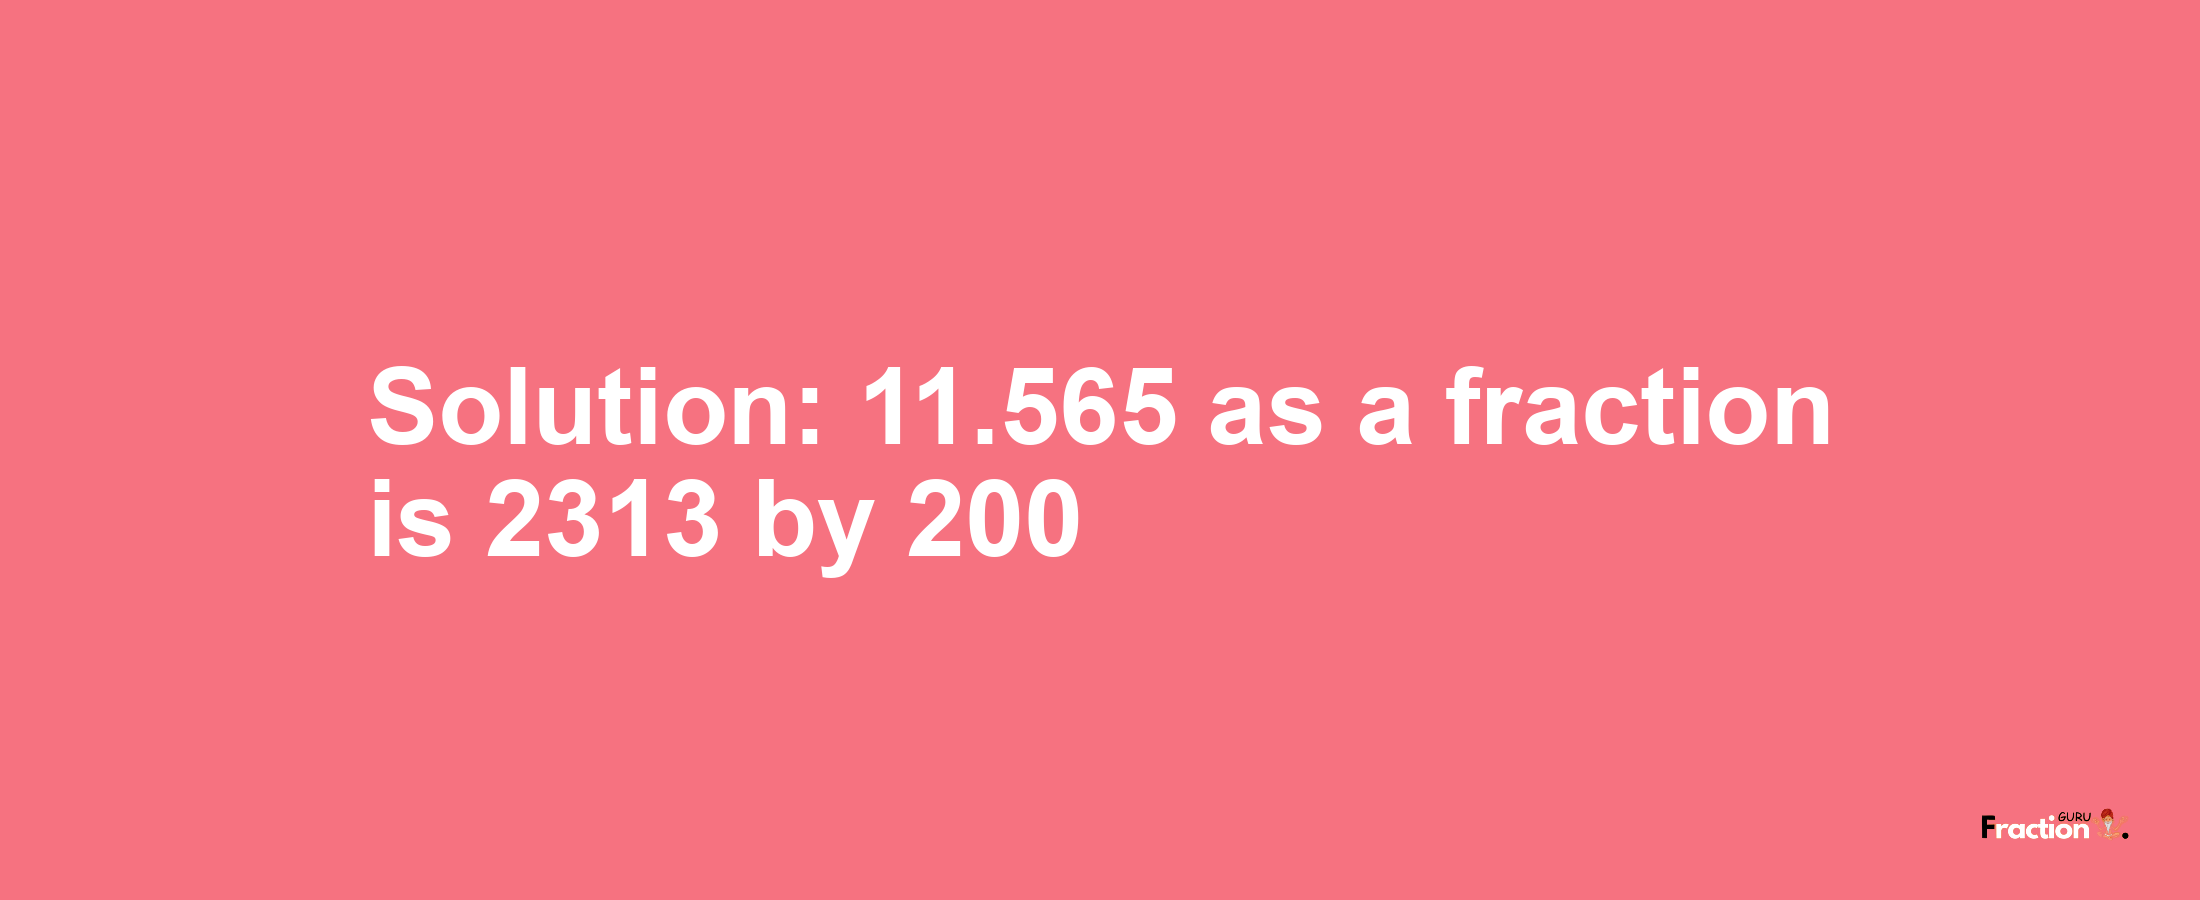 Solution:11.565 as a fraction is 2313/200